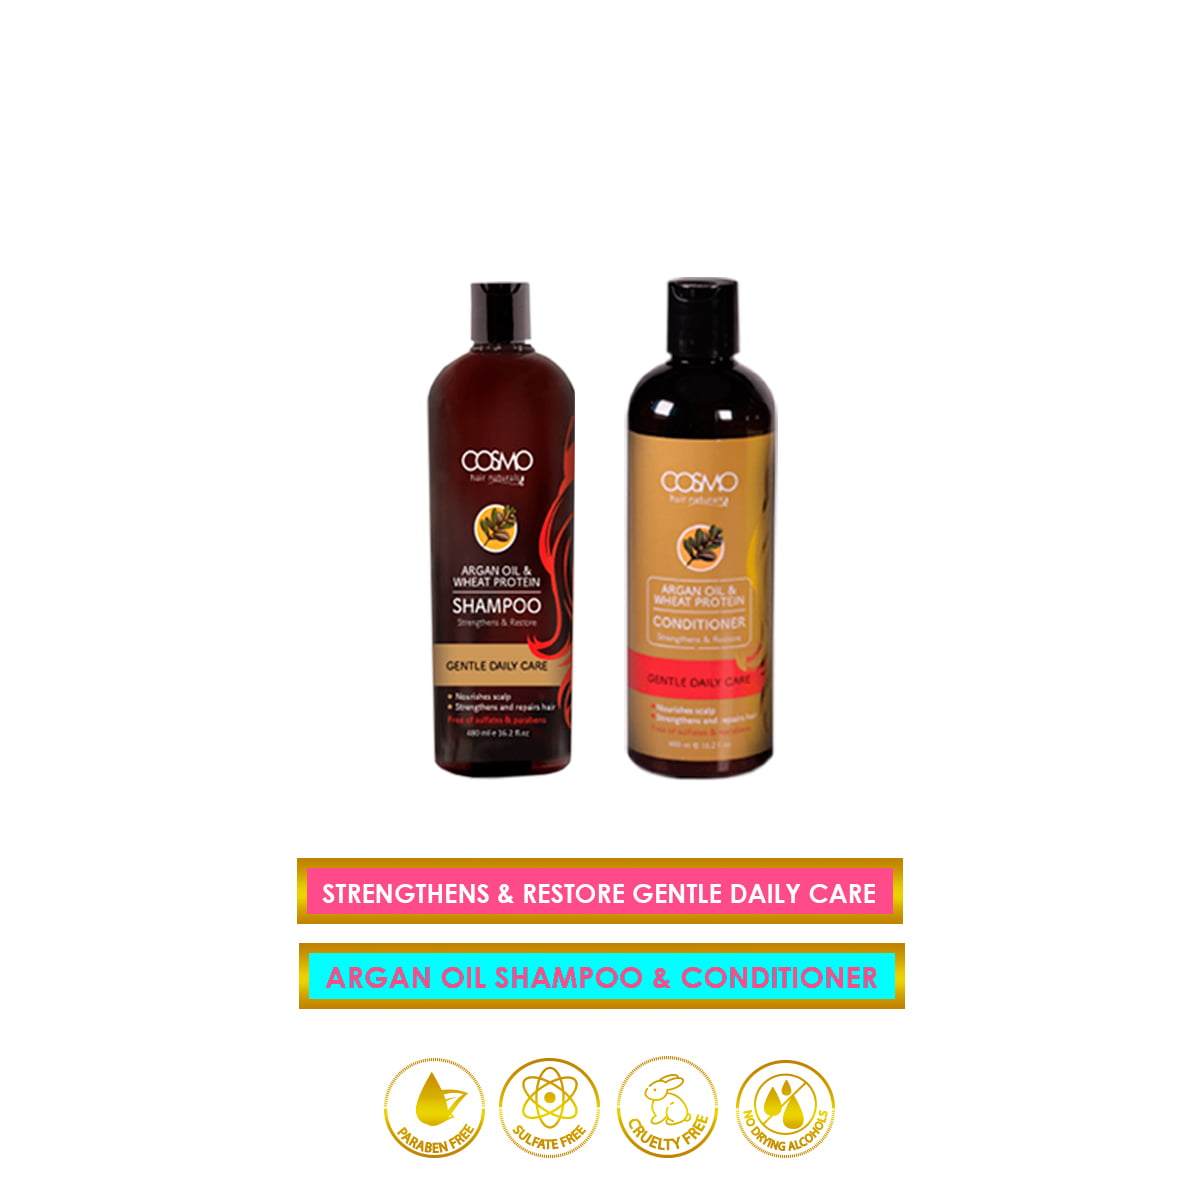 Rafflesia Arnoldi undtagelse gruppe Pack of 2 Shampoo & Conditioner Sulfate and Paraben Free - Argan Oil &  wheat Protein 8.4 Fl.Oz. - Walmart.com